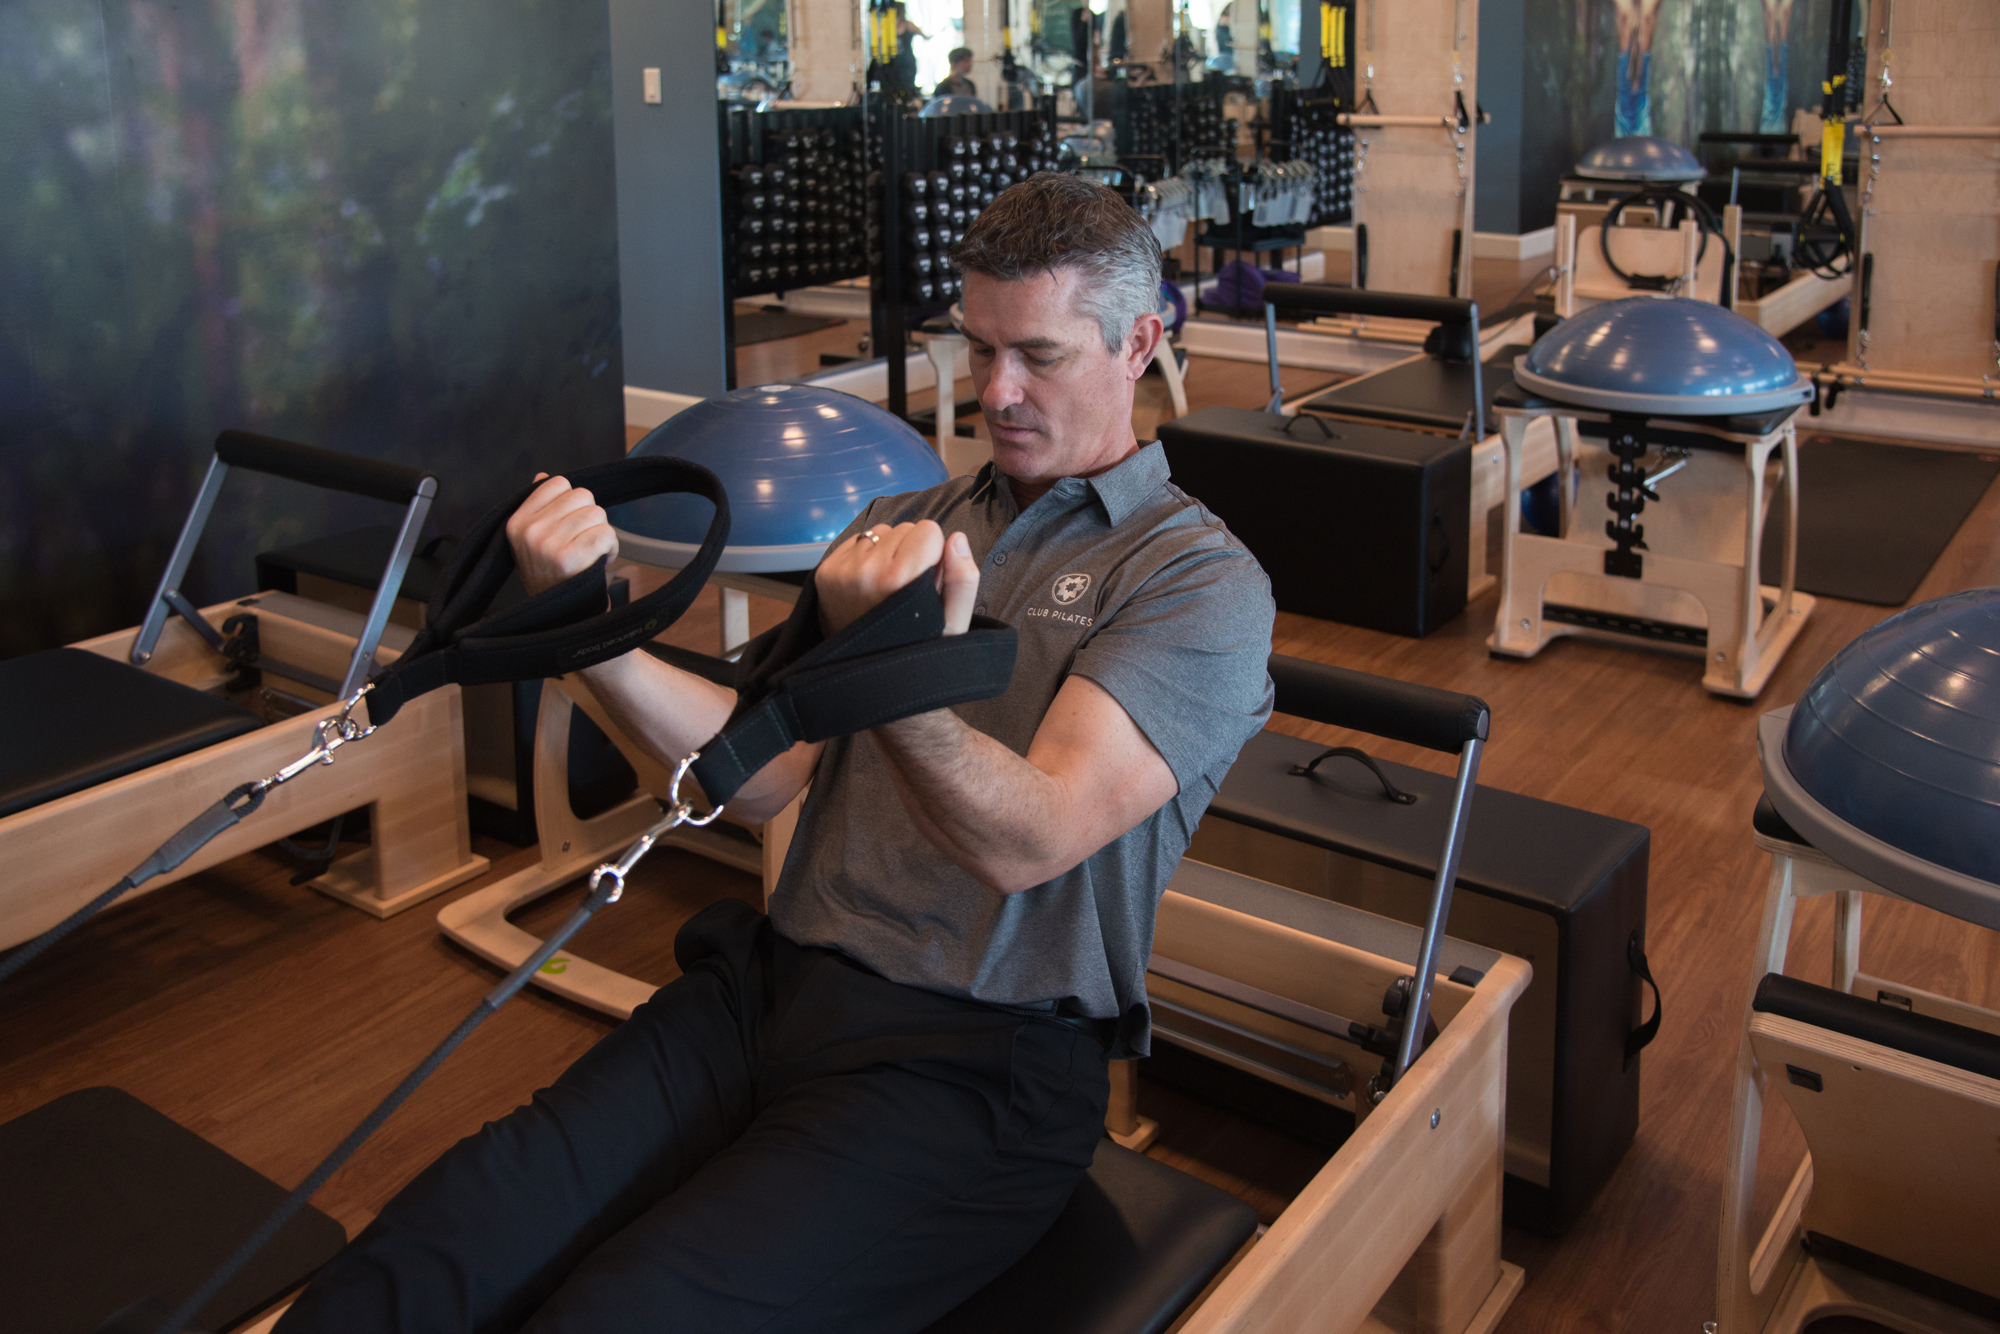 Courtesy. Peter Kilcullen and a business partner operate five Club Pilates locations in the region, including two in Sarasota and one each in Bradenton, Largo and Clearwater.